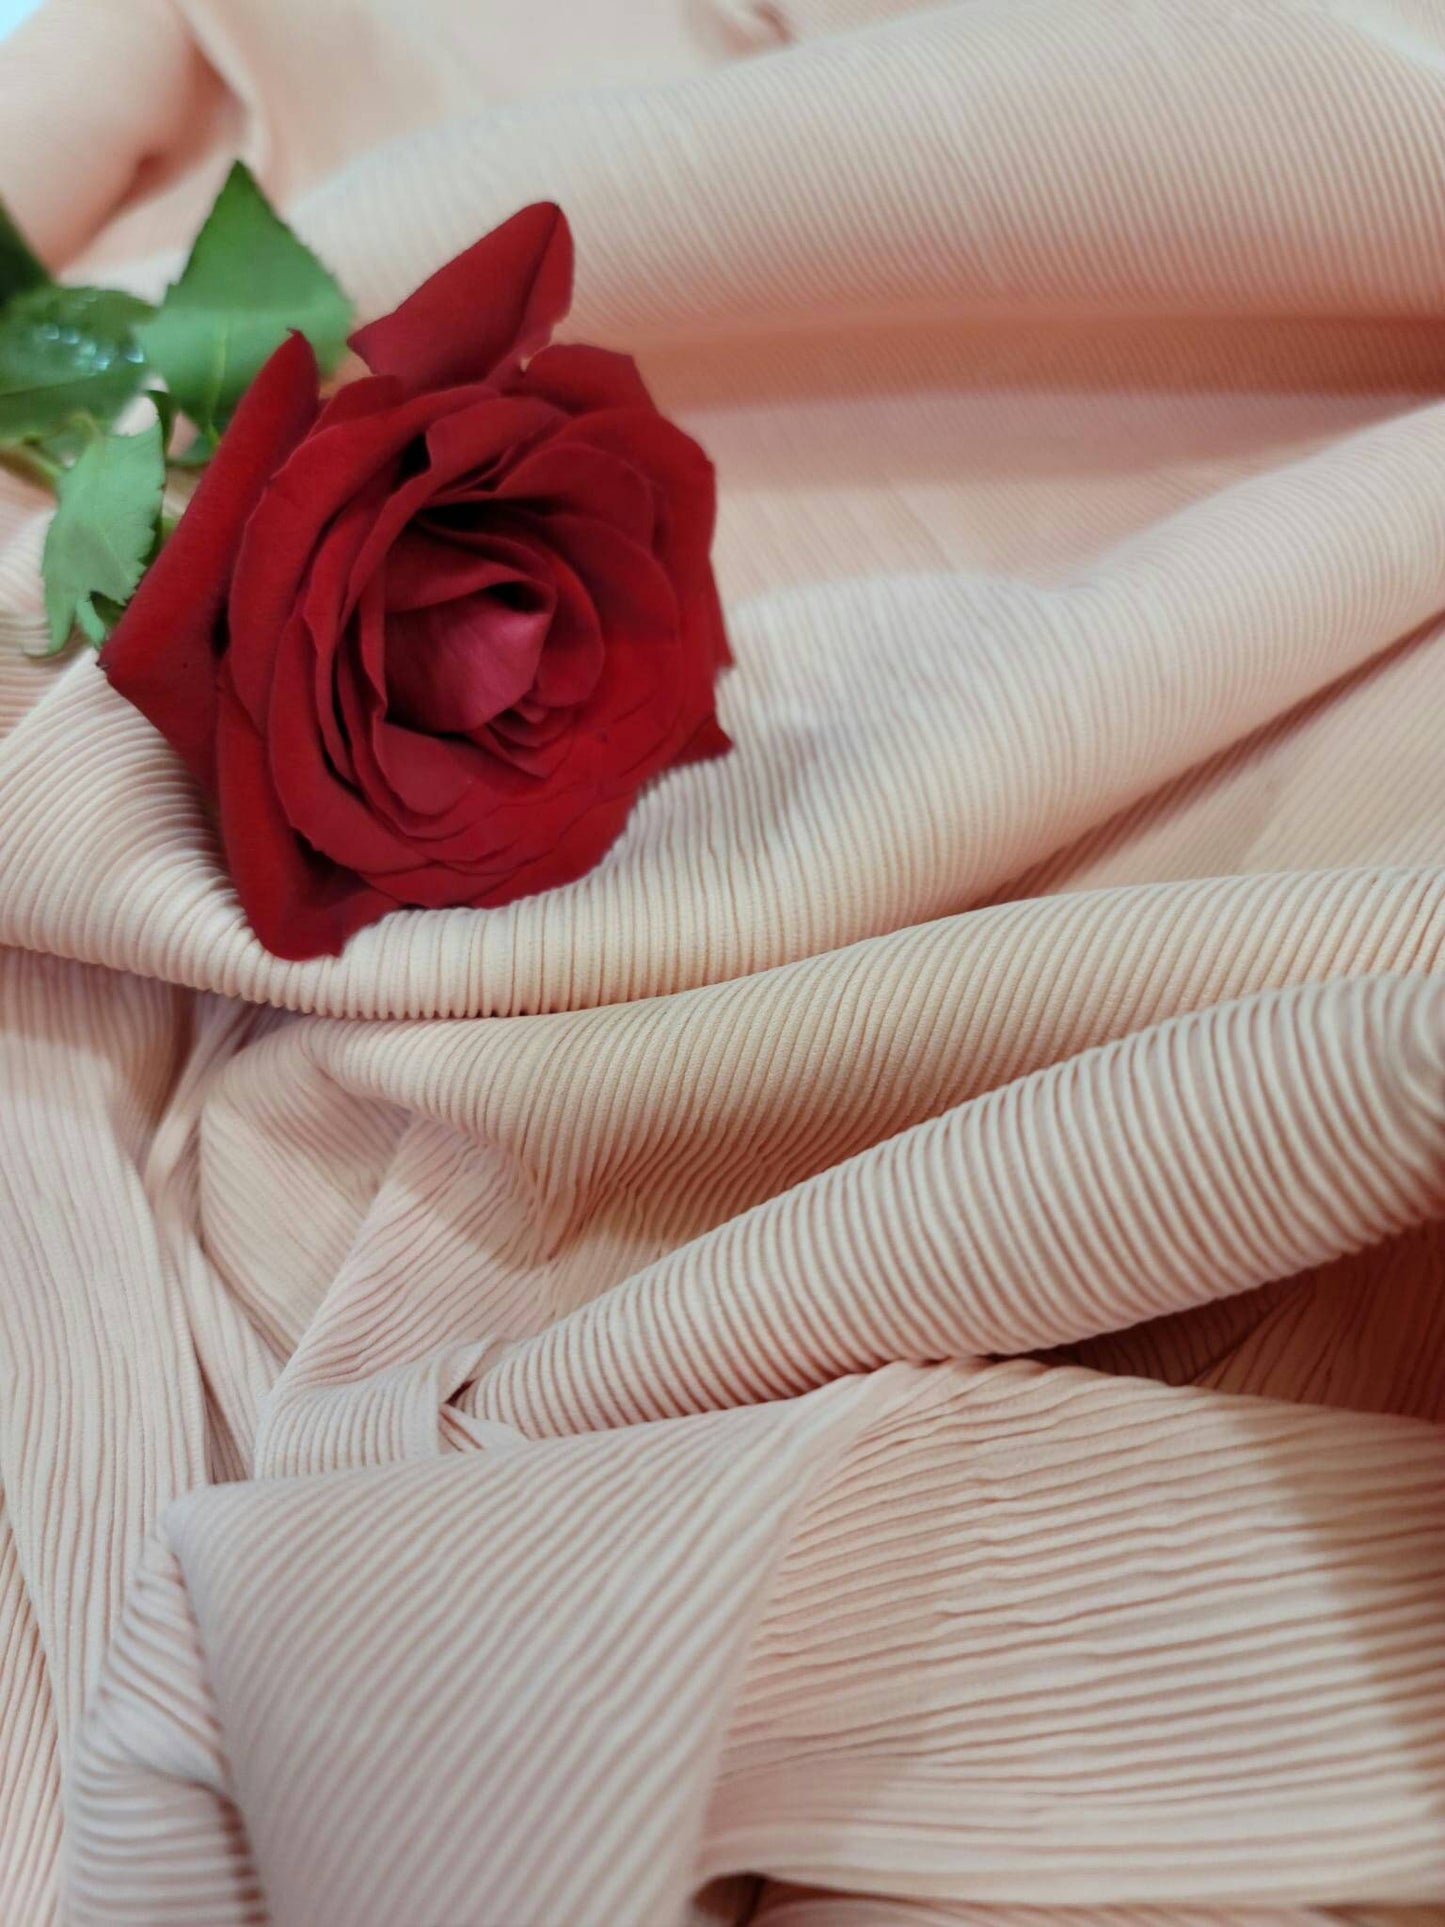 Blush Pleated Stretch Nylon Spandex  Fabric Sold by the Yard Gown Quinceañera Bridal Prom Gown